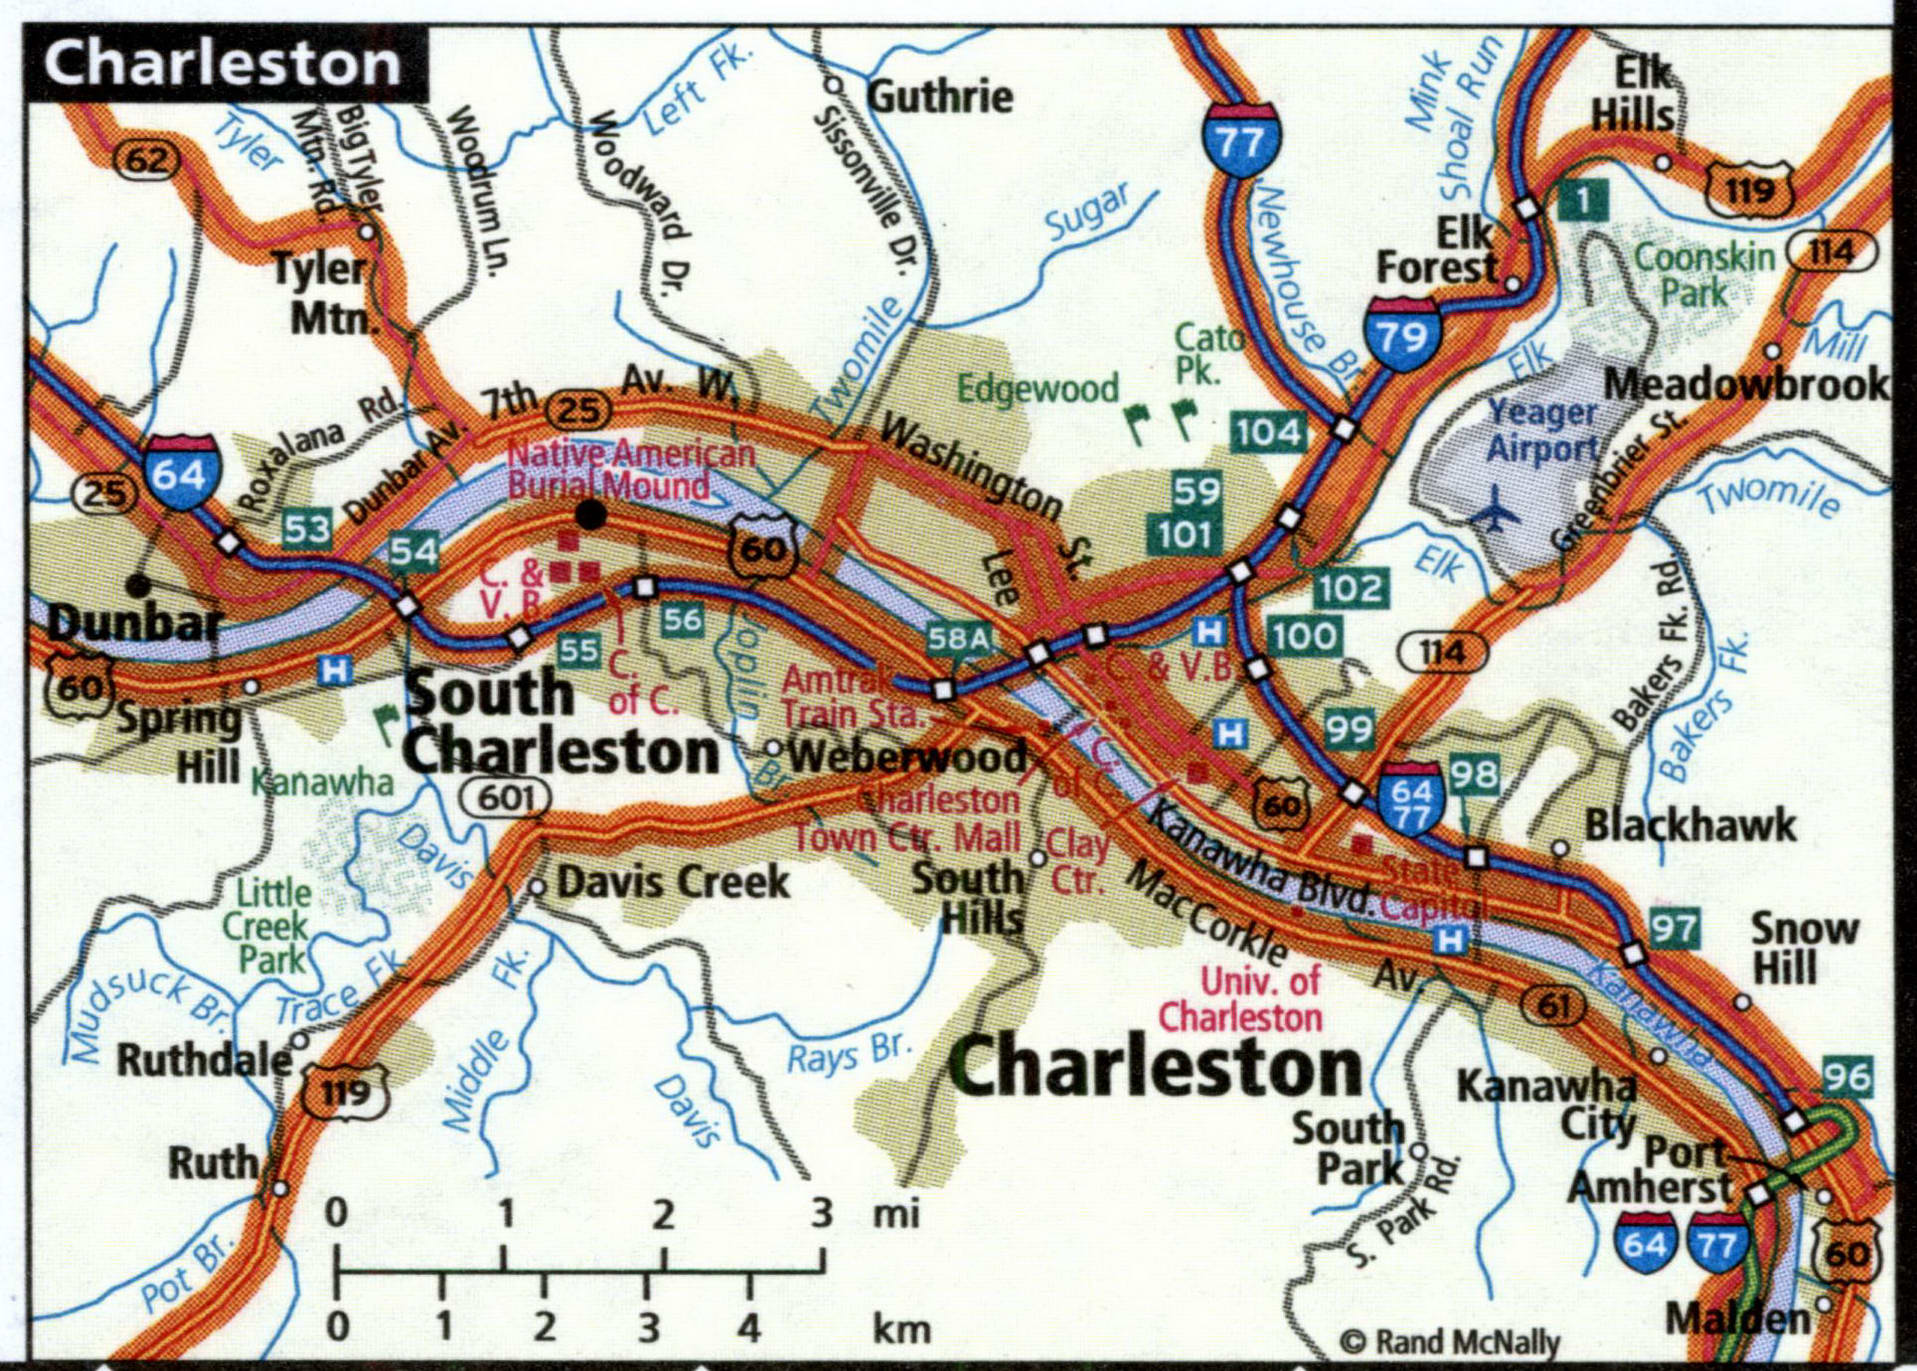 Charleston city map for truckers